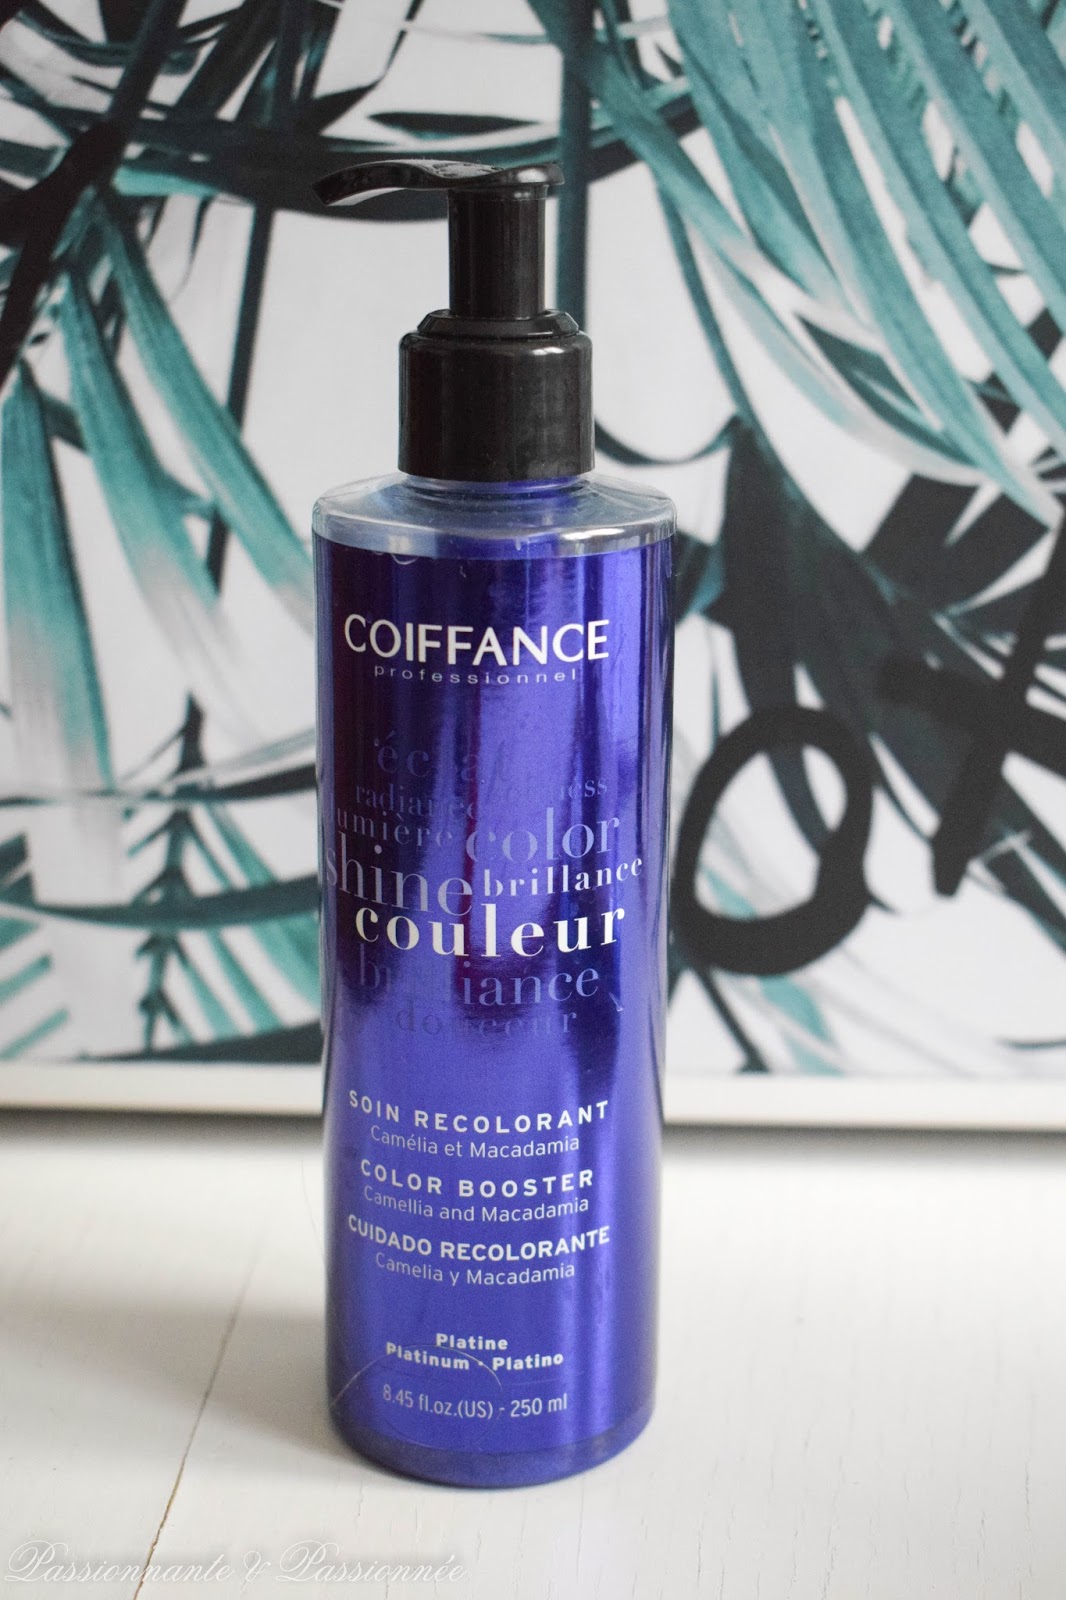 soin recolorant coiffance